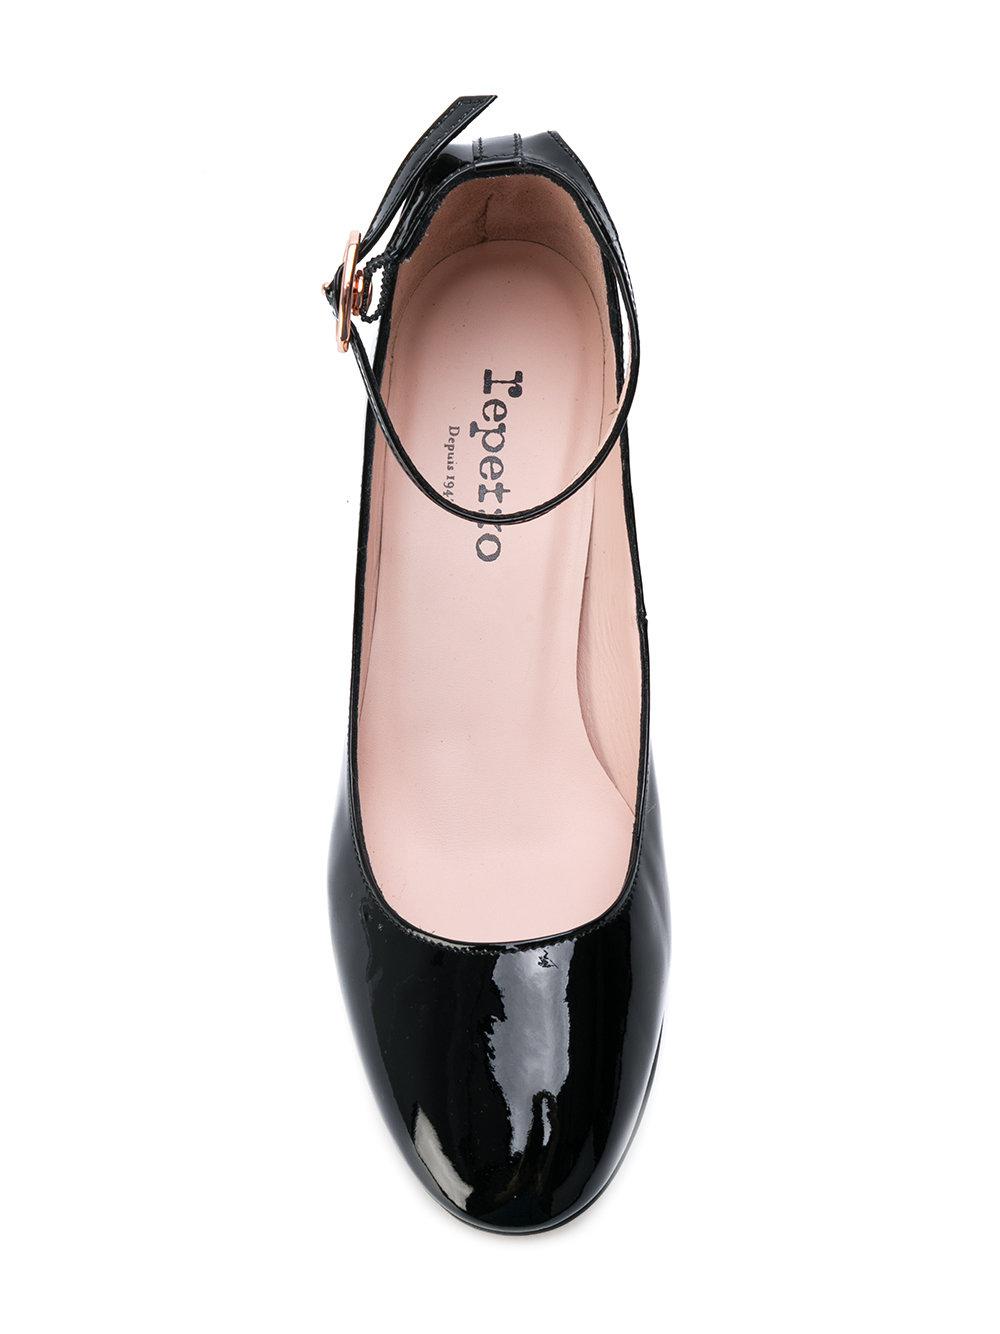 Lyst - Repetto Ankle Strap Pumps in Black